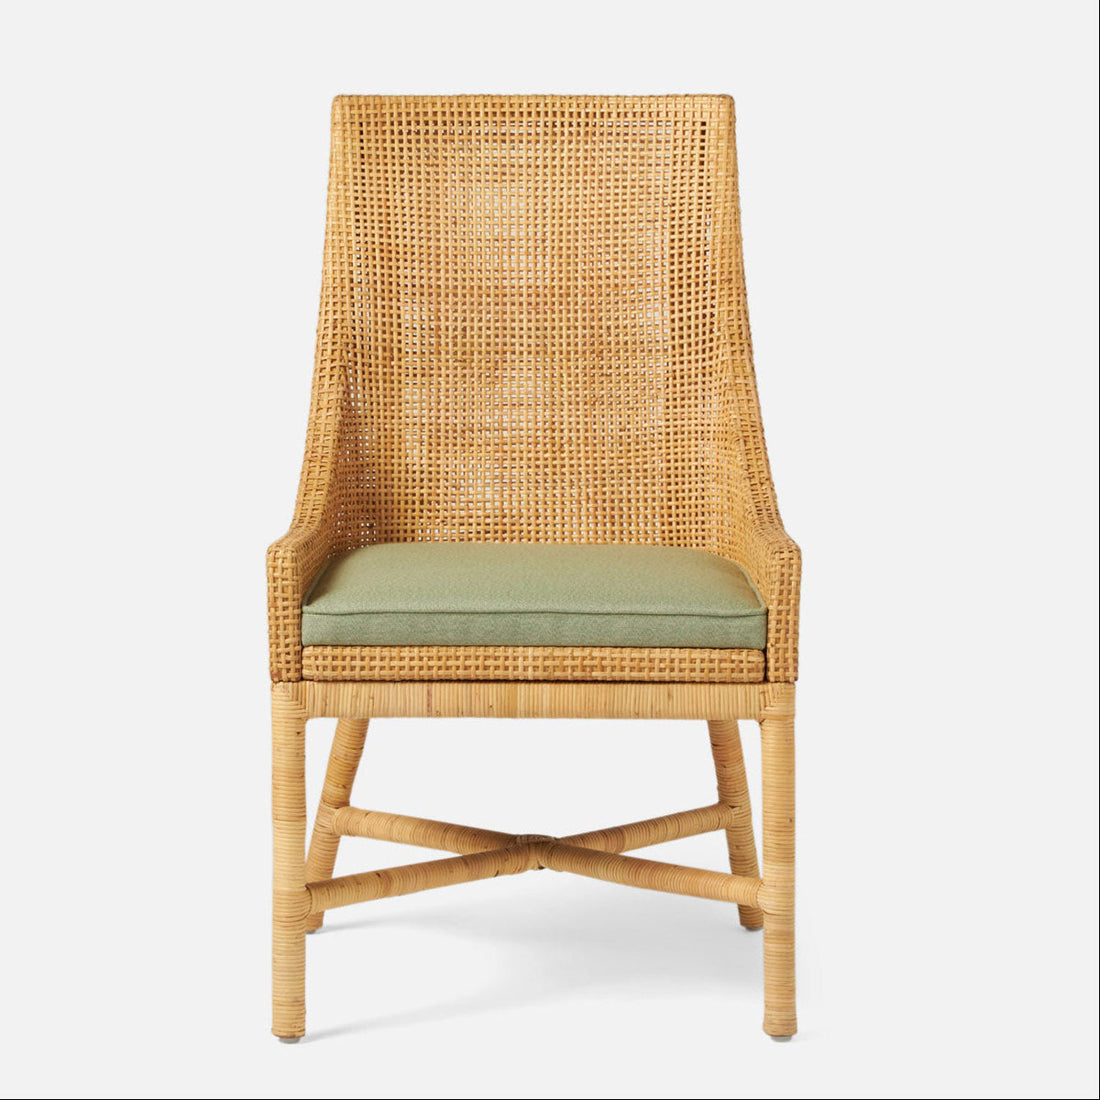 Made Goods Isla Woven Rattan Dining Chair in Mondego Cotton Jute